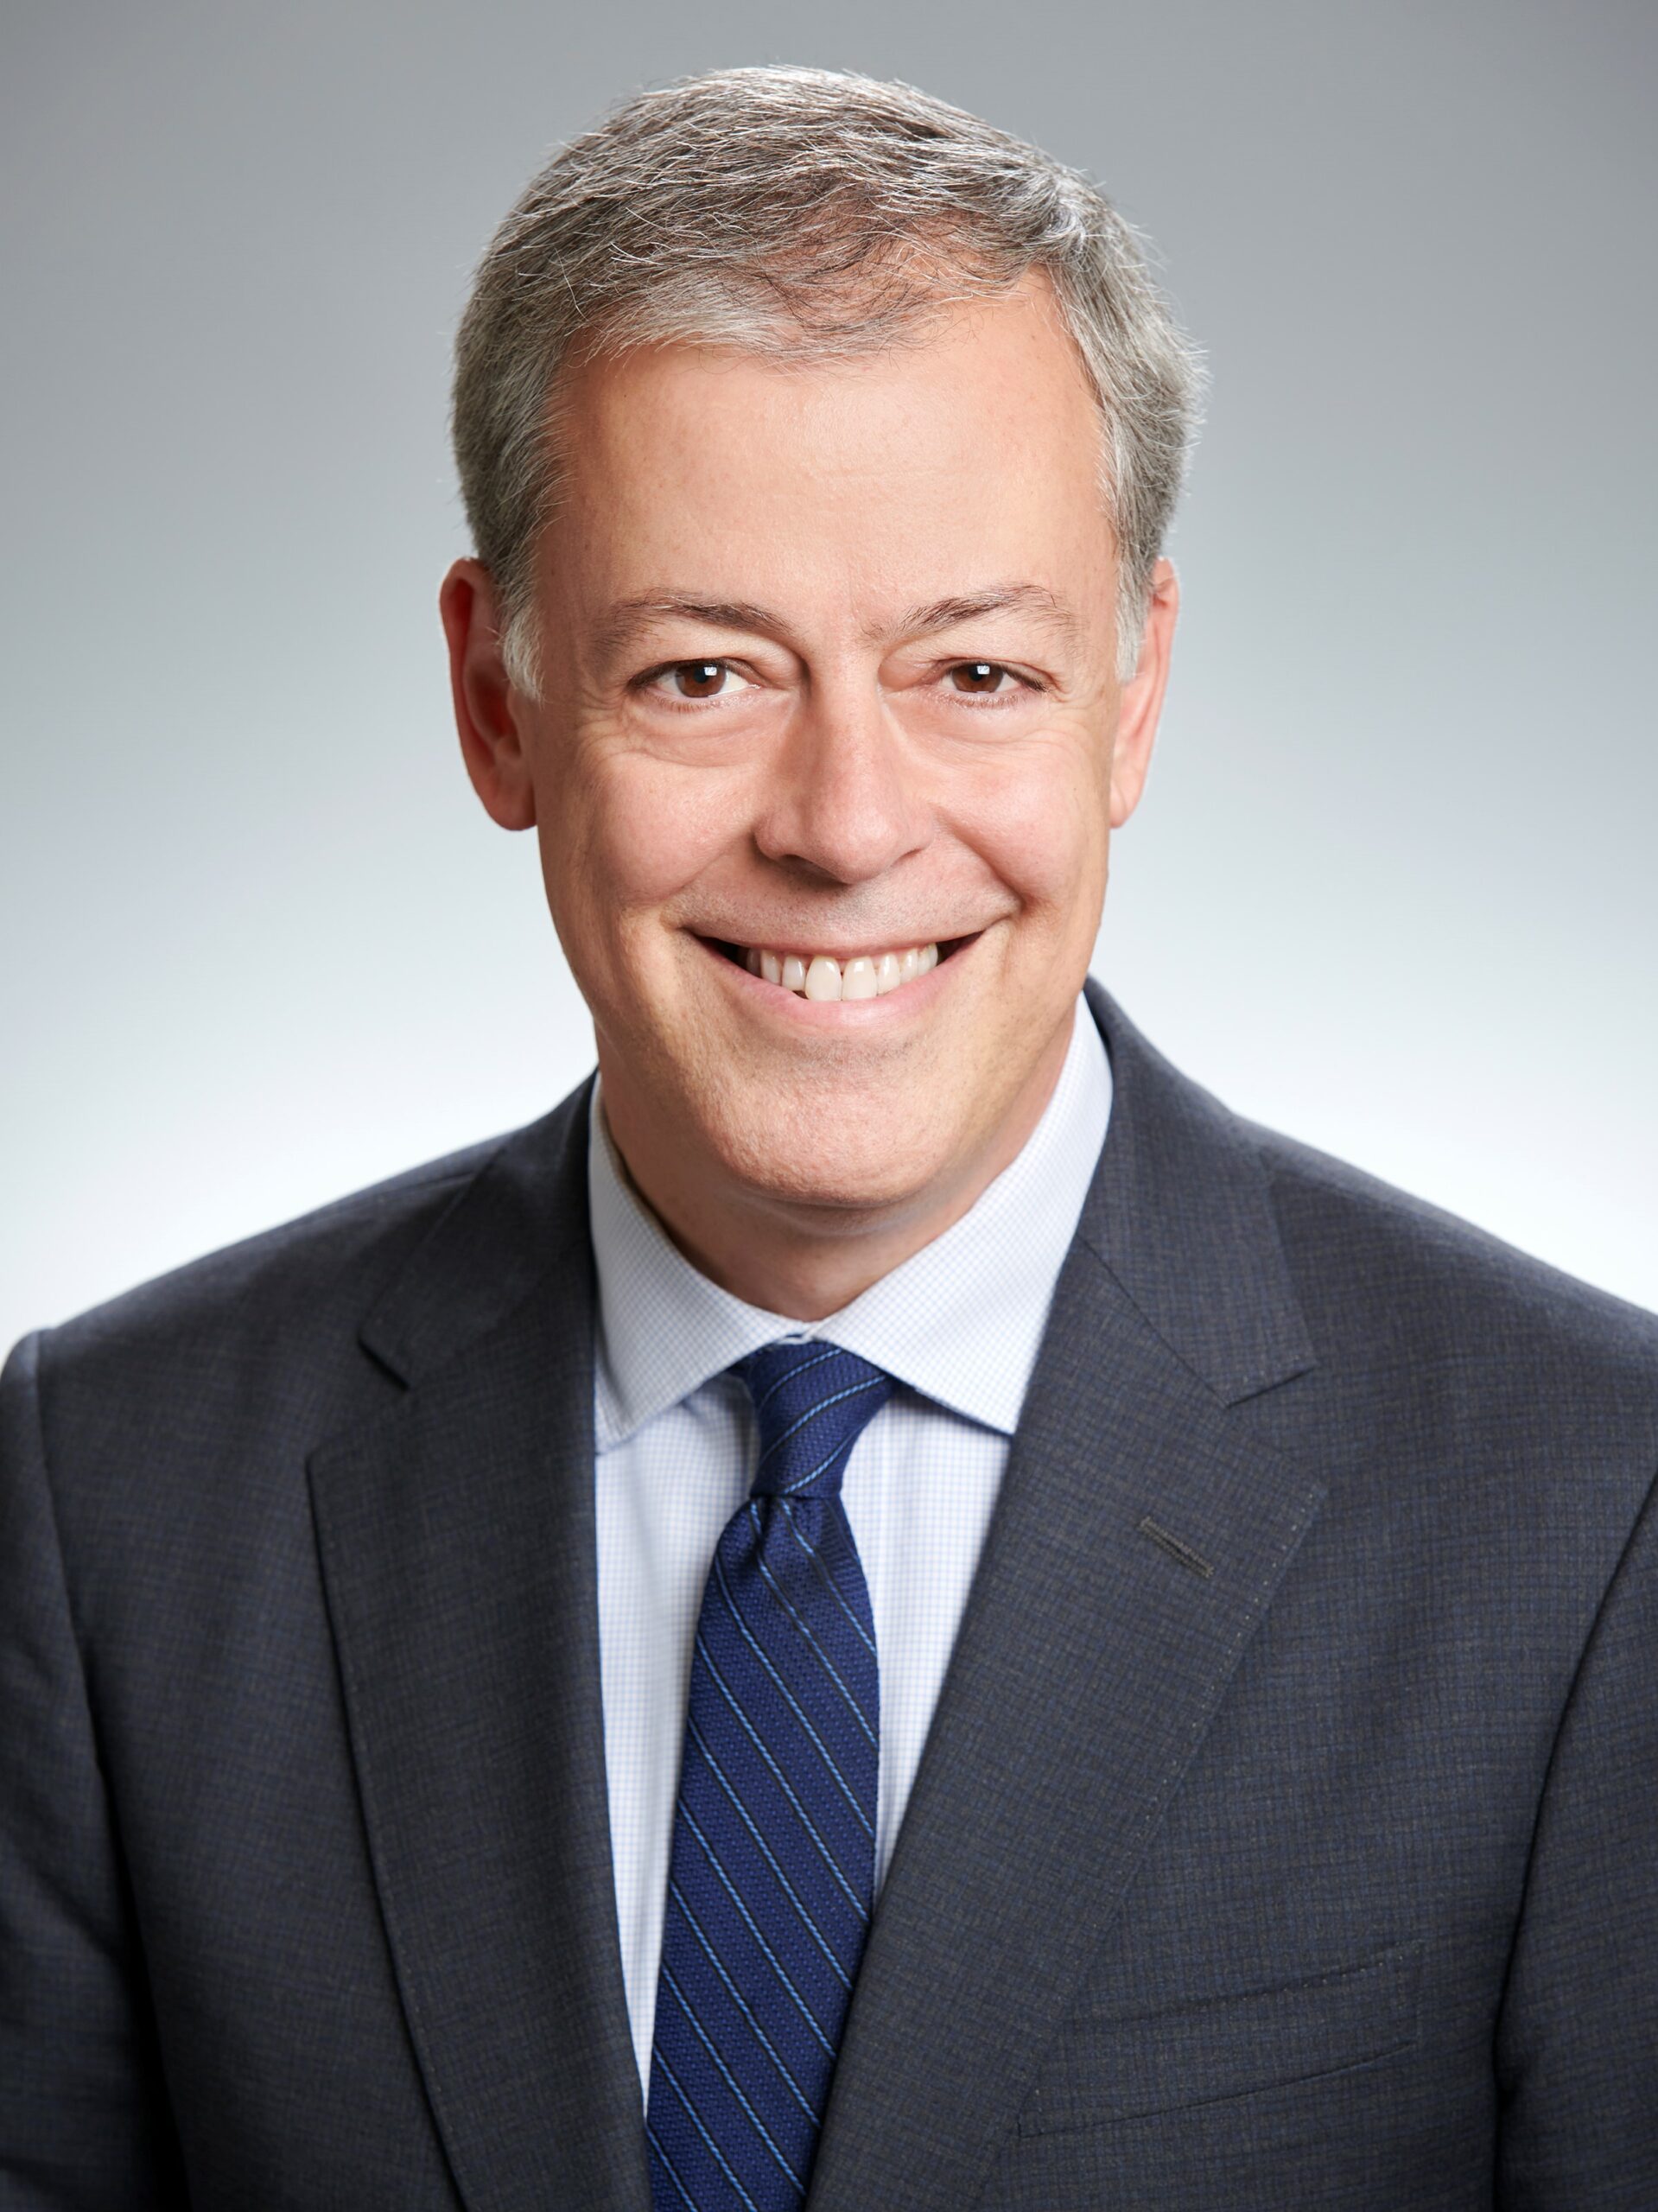 <hr></hr>
Nicolas Caprio
<br>Chief Operating Officer & General Manager
<br>Rexall